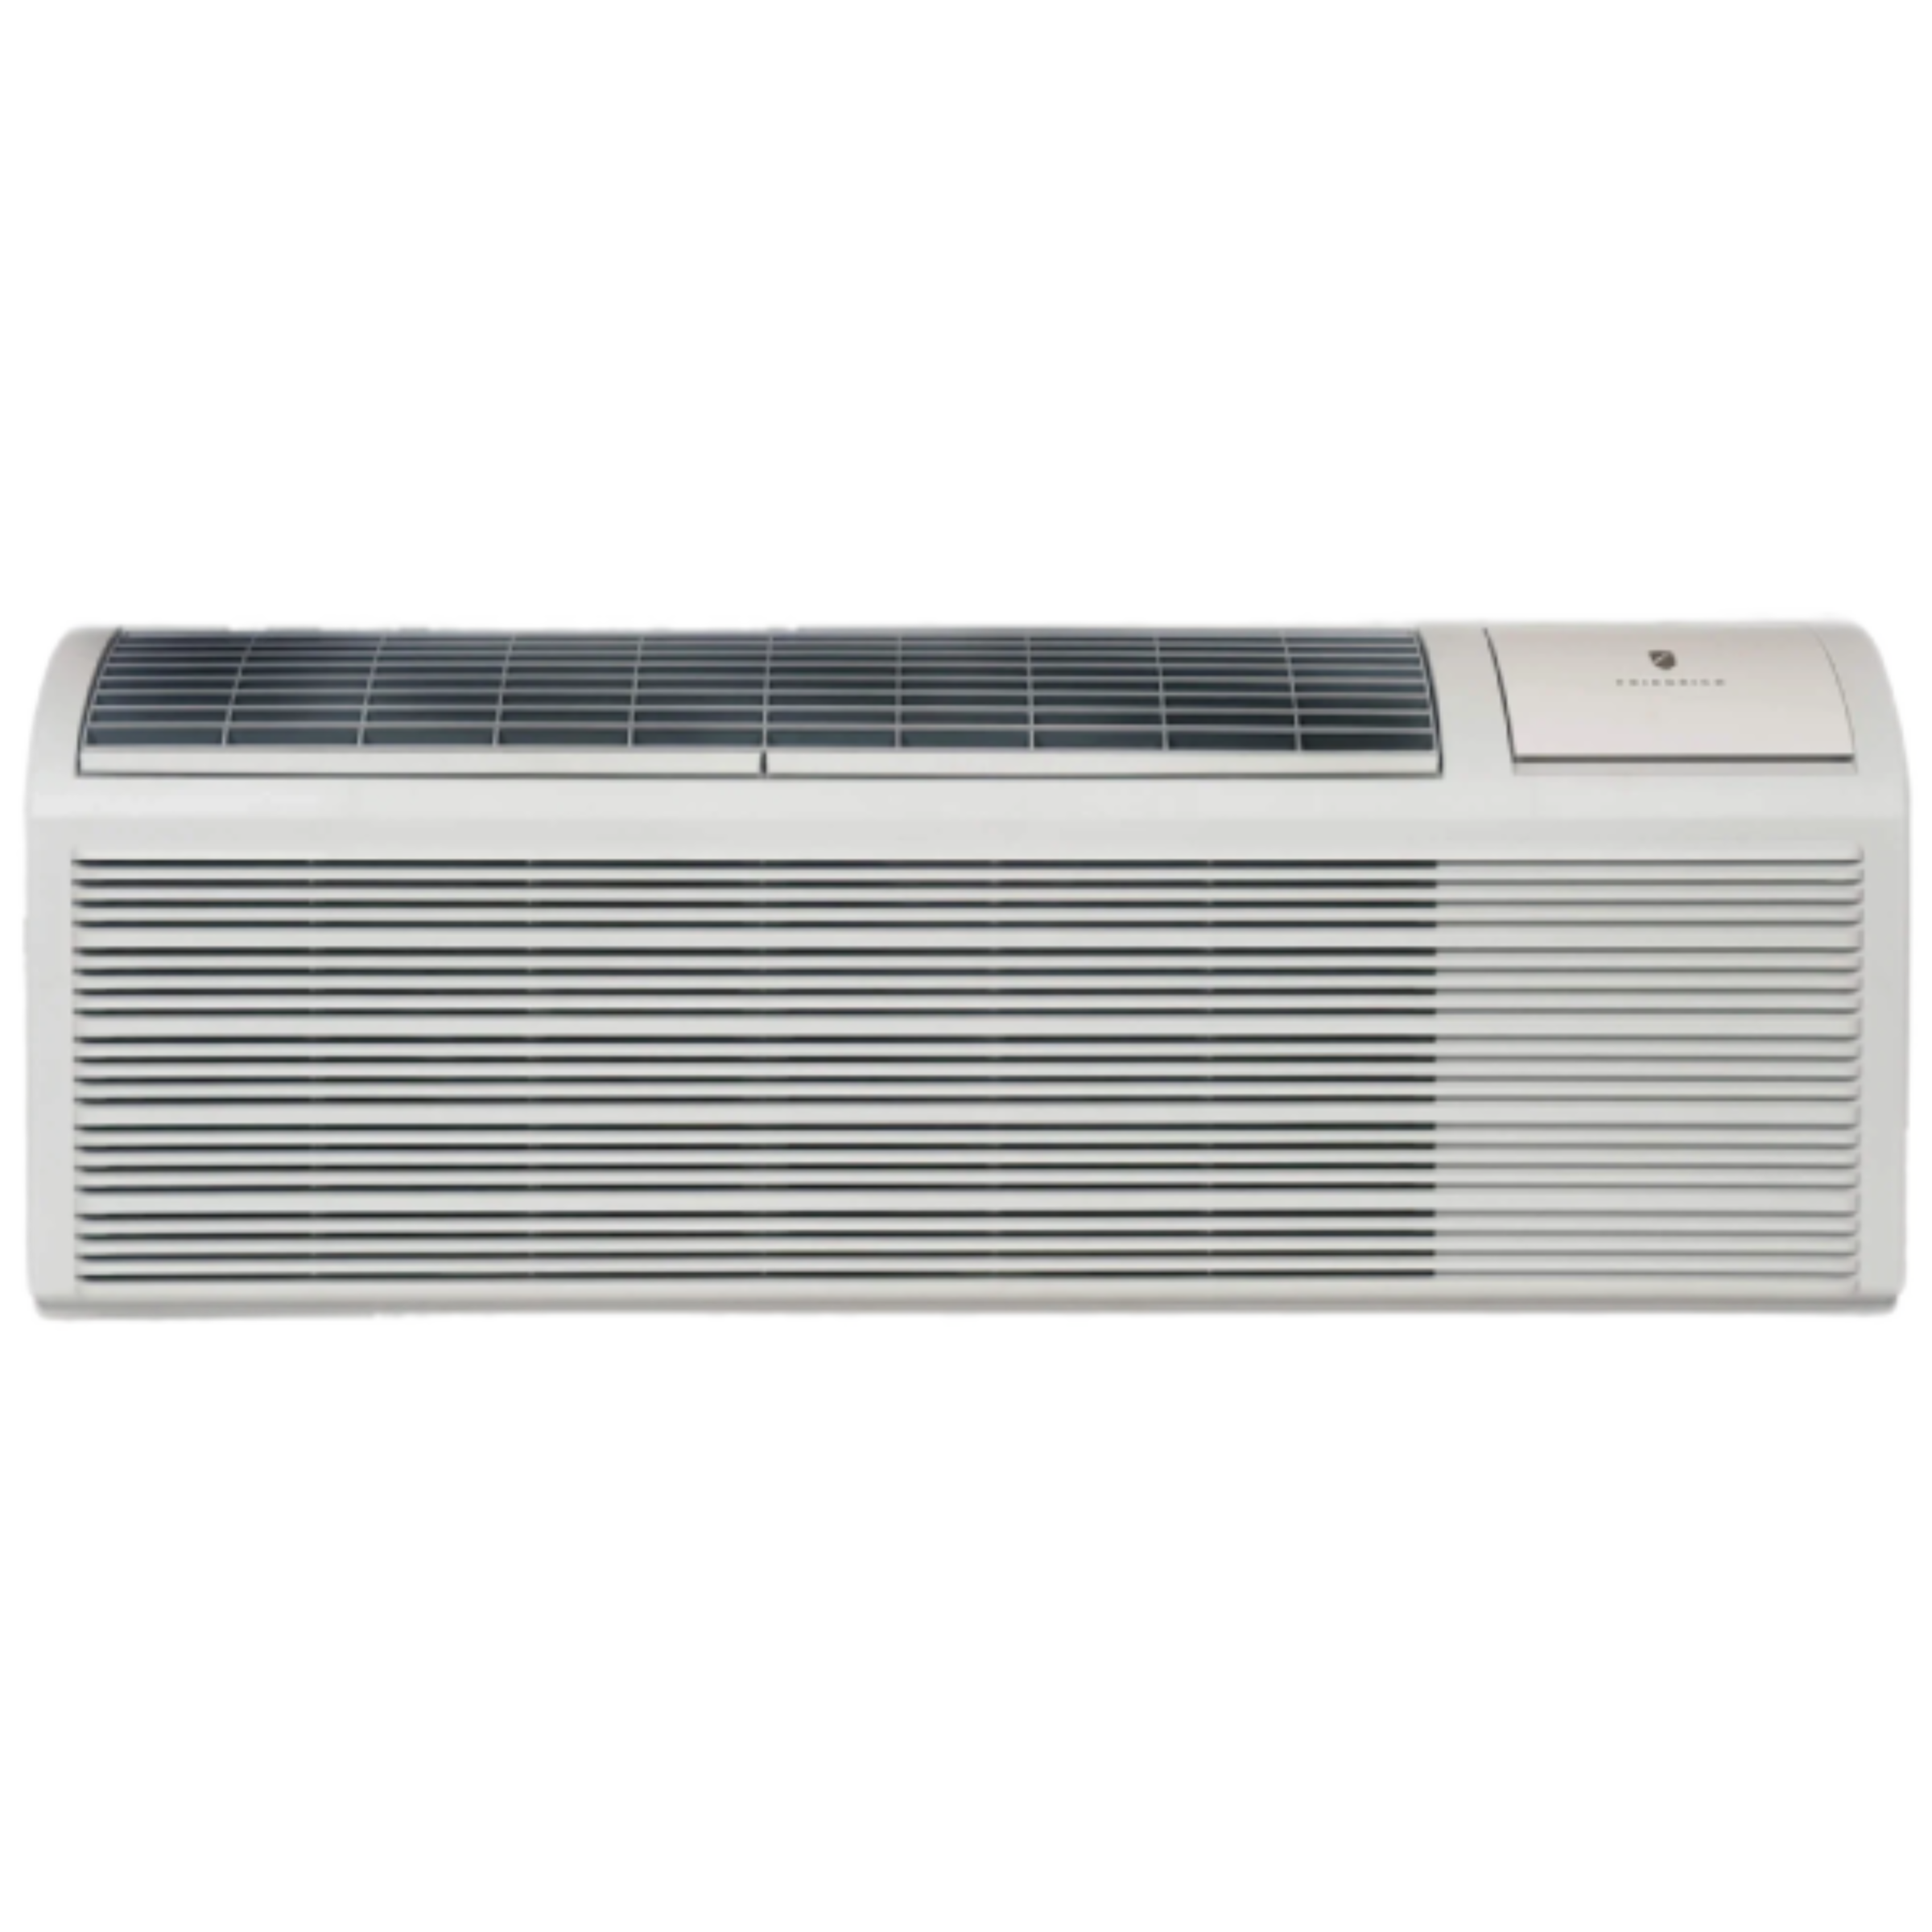 Friedrich ZoneAire Premier Packaged Terminal Air Conditioner with Electric Heat Model PDE07R3SG, 13.0 EER, 265 V, 345 CFM, 7200 BTU